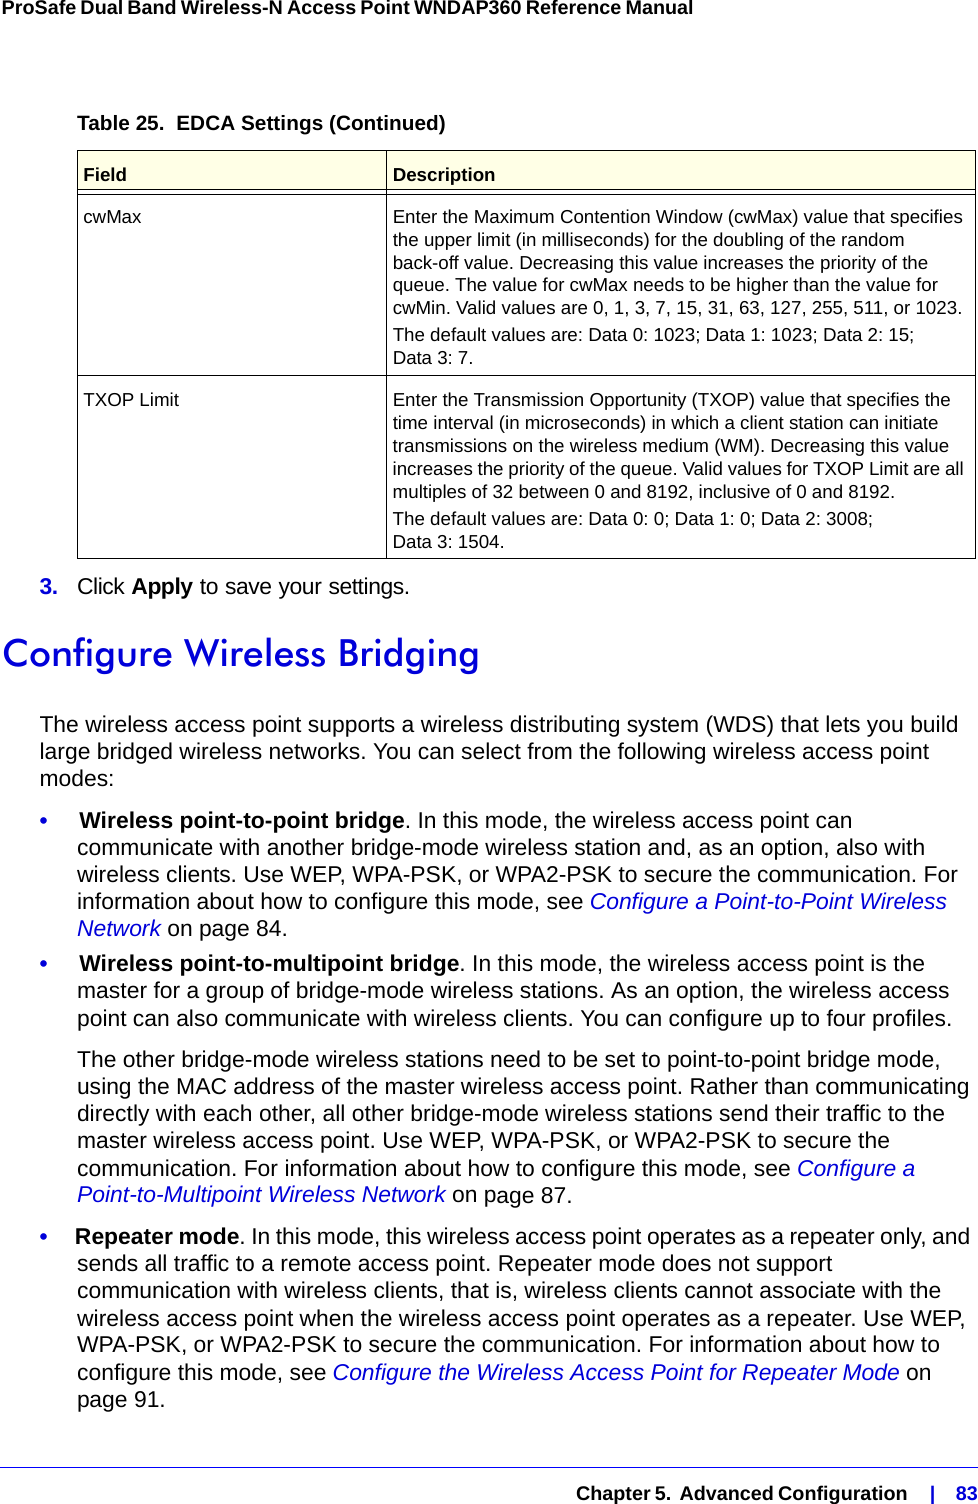   Chapter 5.  Advanced Configuration    |    83ProSafe Dual Band Wireless-N Access Point WNDAP360 Reference Manual 3.  Click Apply to save your settings. Configure Wireless BridgingThe wireless access point supports a wireless distributing system (WDS) that lets you build large bridged wireless networks. You can select from the following wireless access point modes:•     Wireless point-to-point bridge. In this mode, the wireless access point can communicate with another bridge-mode wireless station and, as an option, also with wireless clients. Use WEP, WPA-PSK, or WPA2-PSK to secure the communication. For information about how to configure this mode, see Configure a Point-to-Point Wireless Network on page 84.•     Wireless point-to-multipoint bridge. In this mode, the wireless access point is the master for a group of bridge-mode wireless stations. As an option, the wireless access point can also communicate with wireless clients. You can configure up to four profiles. The other bridge-mode wireless stations need to be set to point-to-point bridge mode, using the MAC address of the master wireless access point. Rather than communicating directly with each other, all other bridge-mode wireless stations send their traffic to the master wireless access point. Use WEP, WPA-PSK, or WPA2-PSK to secure the communication. For information about how to configure this mode, see Configure a Point-to-Multipoint Wireless Network on page 87.•     Repeater mode. In this mode, this wireless access point operates as a repeater only, and sends all traffic to a remote access point. Repeater mode does not support communication with wireless clients, that is, wireless clients cannot associate with the wireless access point when the wireless access point operates as a repeater. Use WEP, WPA-PSK, or WPA2-PSK to secure the communication. For information about how to configure this mode, see Configure the Wireless Access Point for Repeater Mode on page 91.cwMax  Enter the Maximum Contention Window (cwMax) value that specifies the upper limit (in milliseconds) for the doubling of the random back-off value. Decreasing this value increases the priority of the queue. The value for cwMax needs to be higher than the value for cwMin. Valid values are 0, 1, 3, 7, 15, 31, 63, 127, 255, 511, or 1023. The default values are: Data 0: 1023; Data 1: 1023; Data 2: 15; Data 3: 7.TXOP Limit Enter the Transmission Opportunity (TXOP) value that specifies the time interval (in microseconds) in which a client station can initiate transmissions on the wireless medium (WM). Decreasing this value increases the priority of the queue. Valid values for TXOP Limit are all multiples of 32 between 0 and 8192, inclusive of 0 and 8192.The default values are: Data 0: 0; Data 1: 0; Data 2: 3008; Data 3: 1504.Table 25.  EDCA Settings (Continued)Field Description